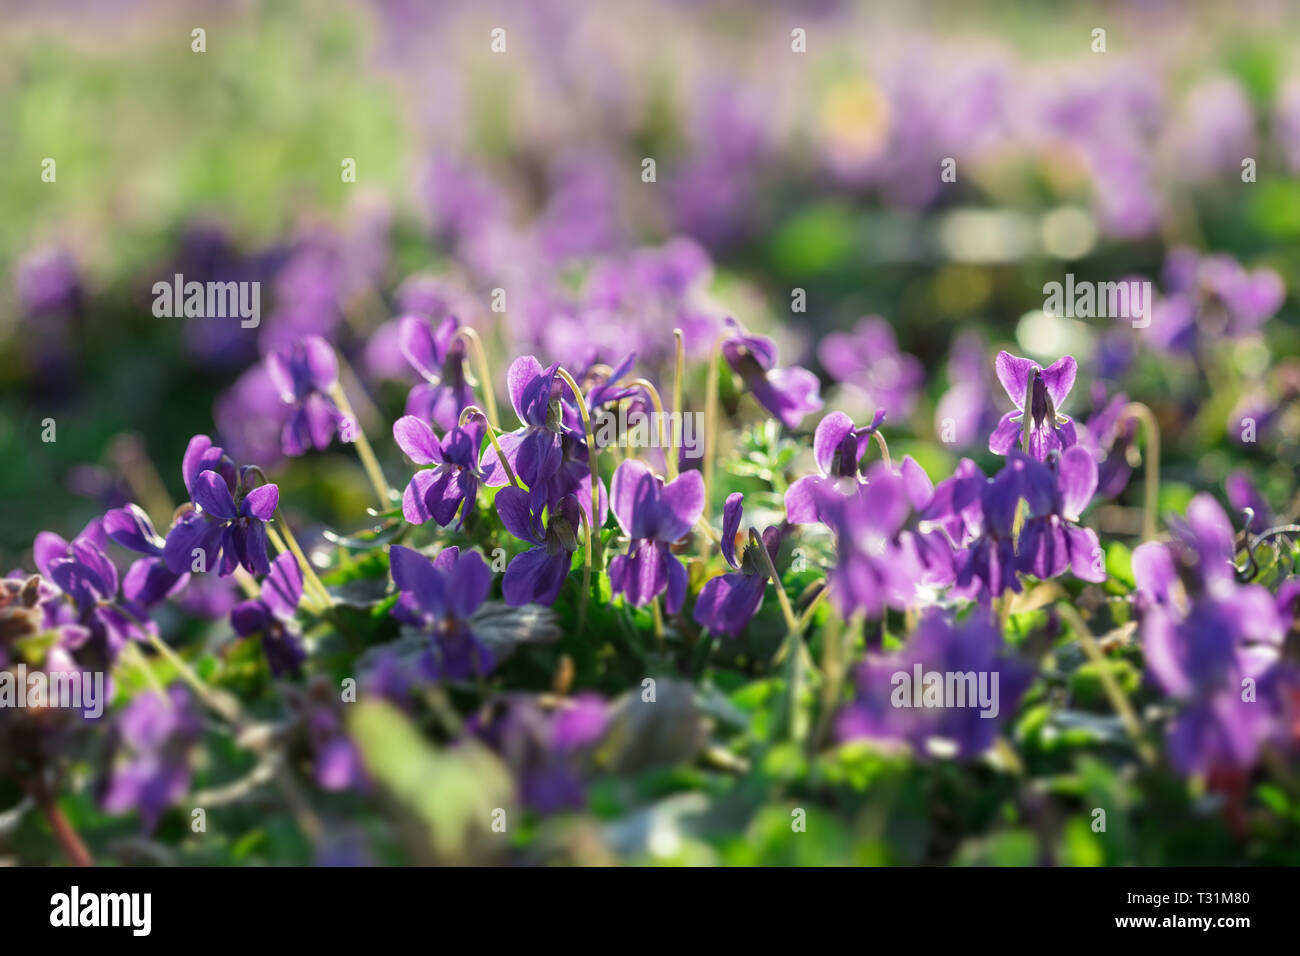 Beautiful Young and Fresh Wild Violets or Violas In the Sunny Early Spring Garden Stock Photo